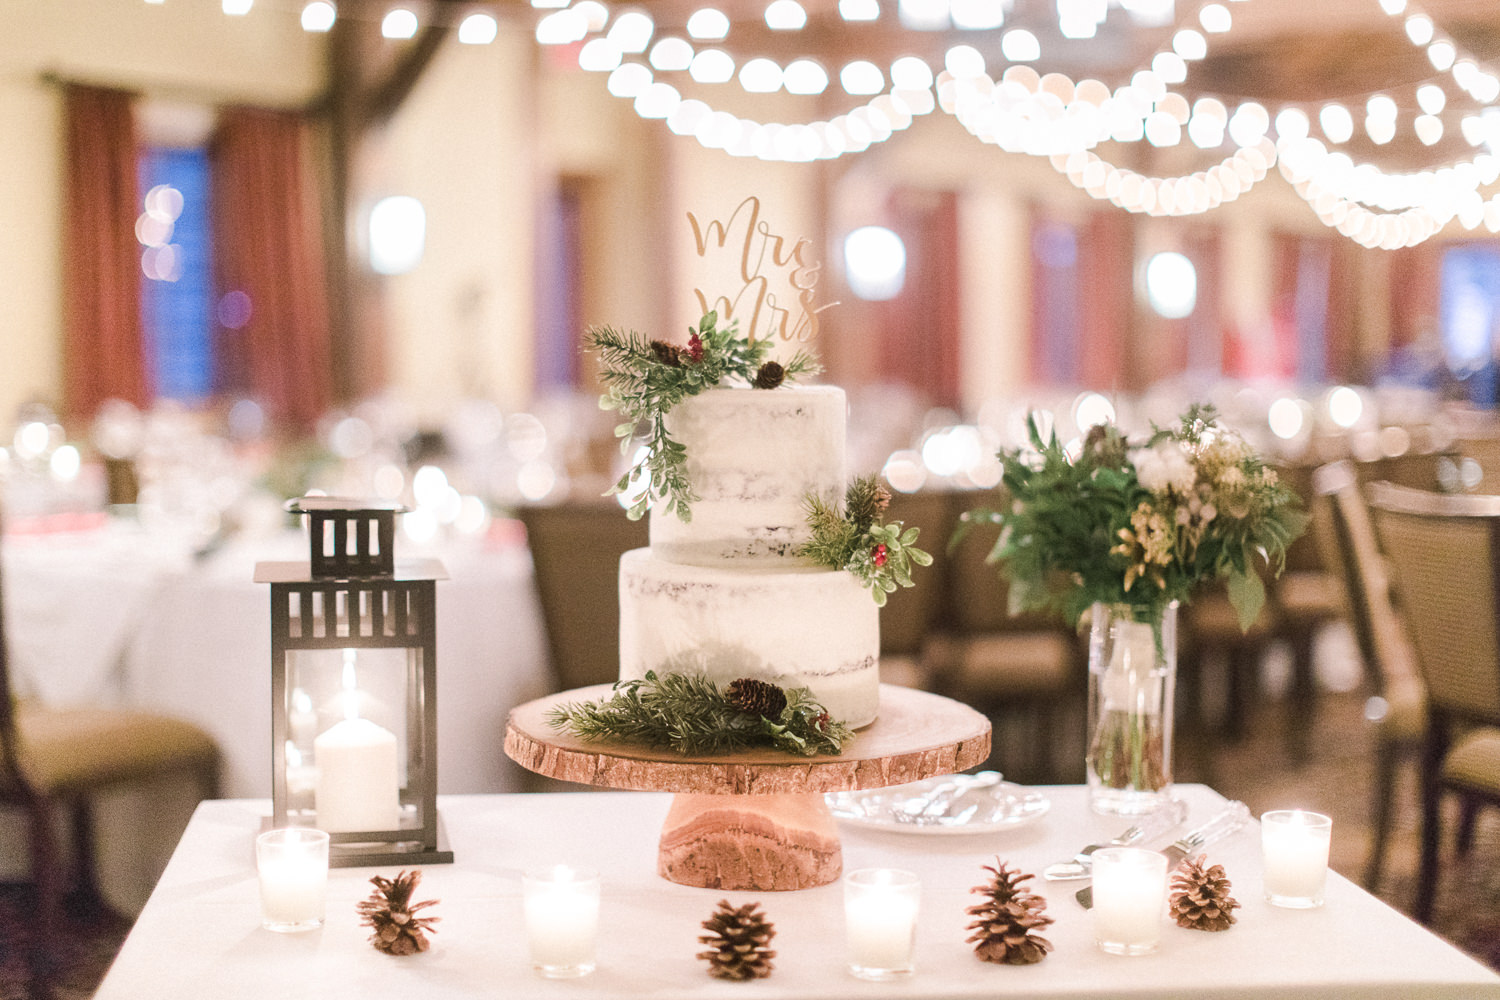 Elegant winter two-tiered cake with textured greenery and gold handwritten sign, winter wedding inspiration. 